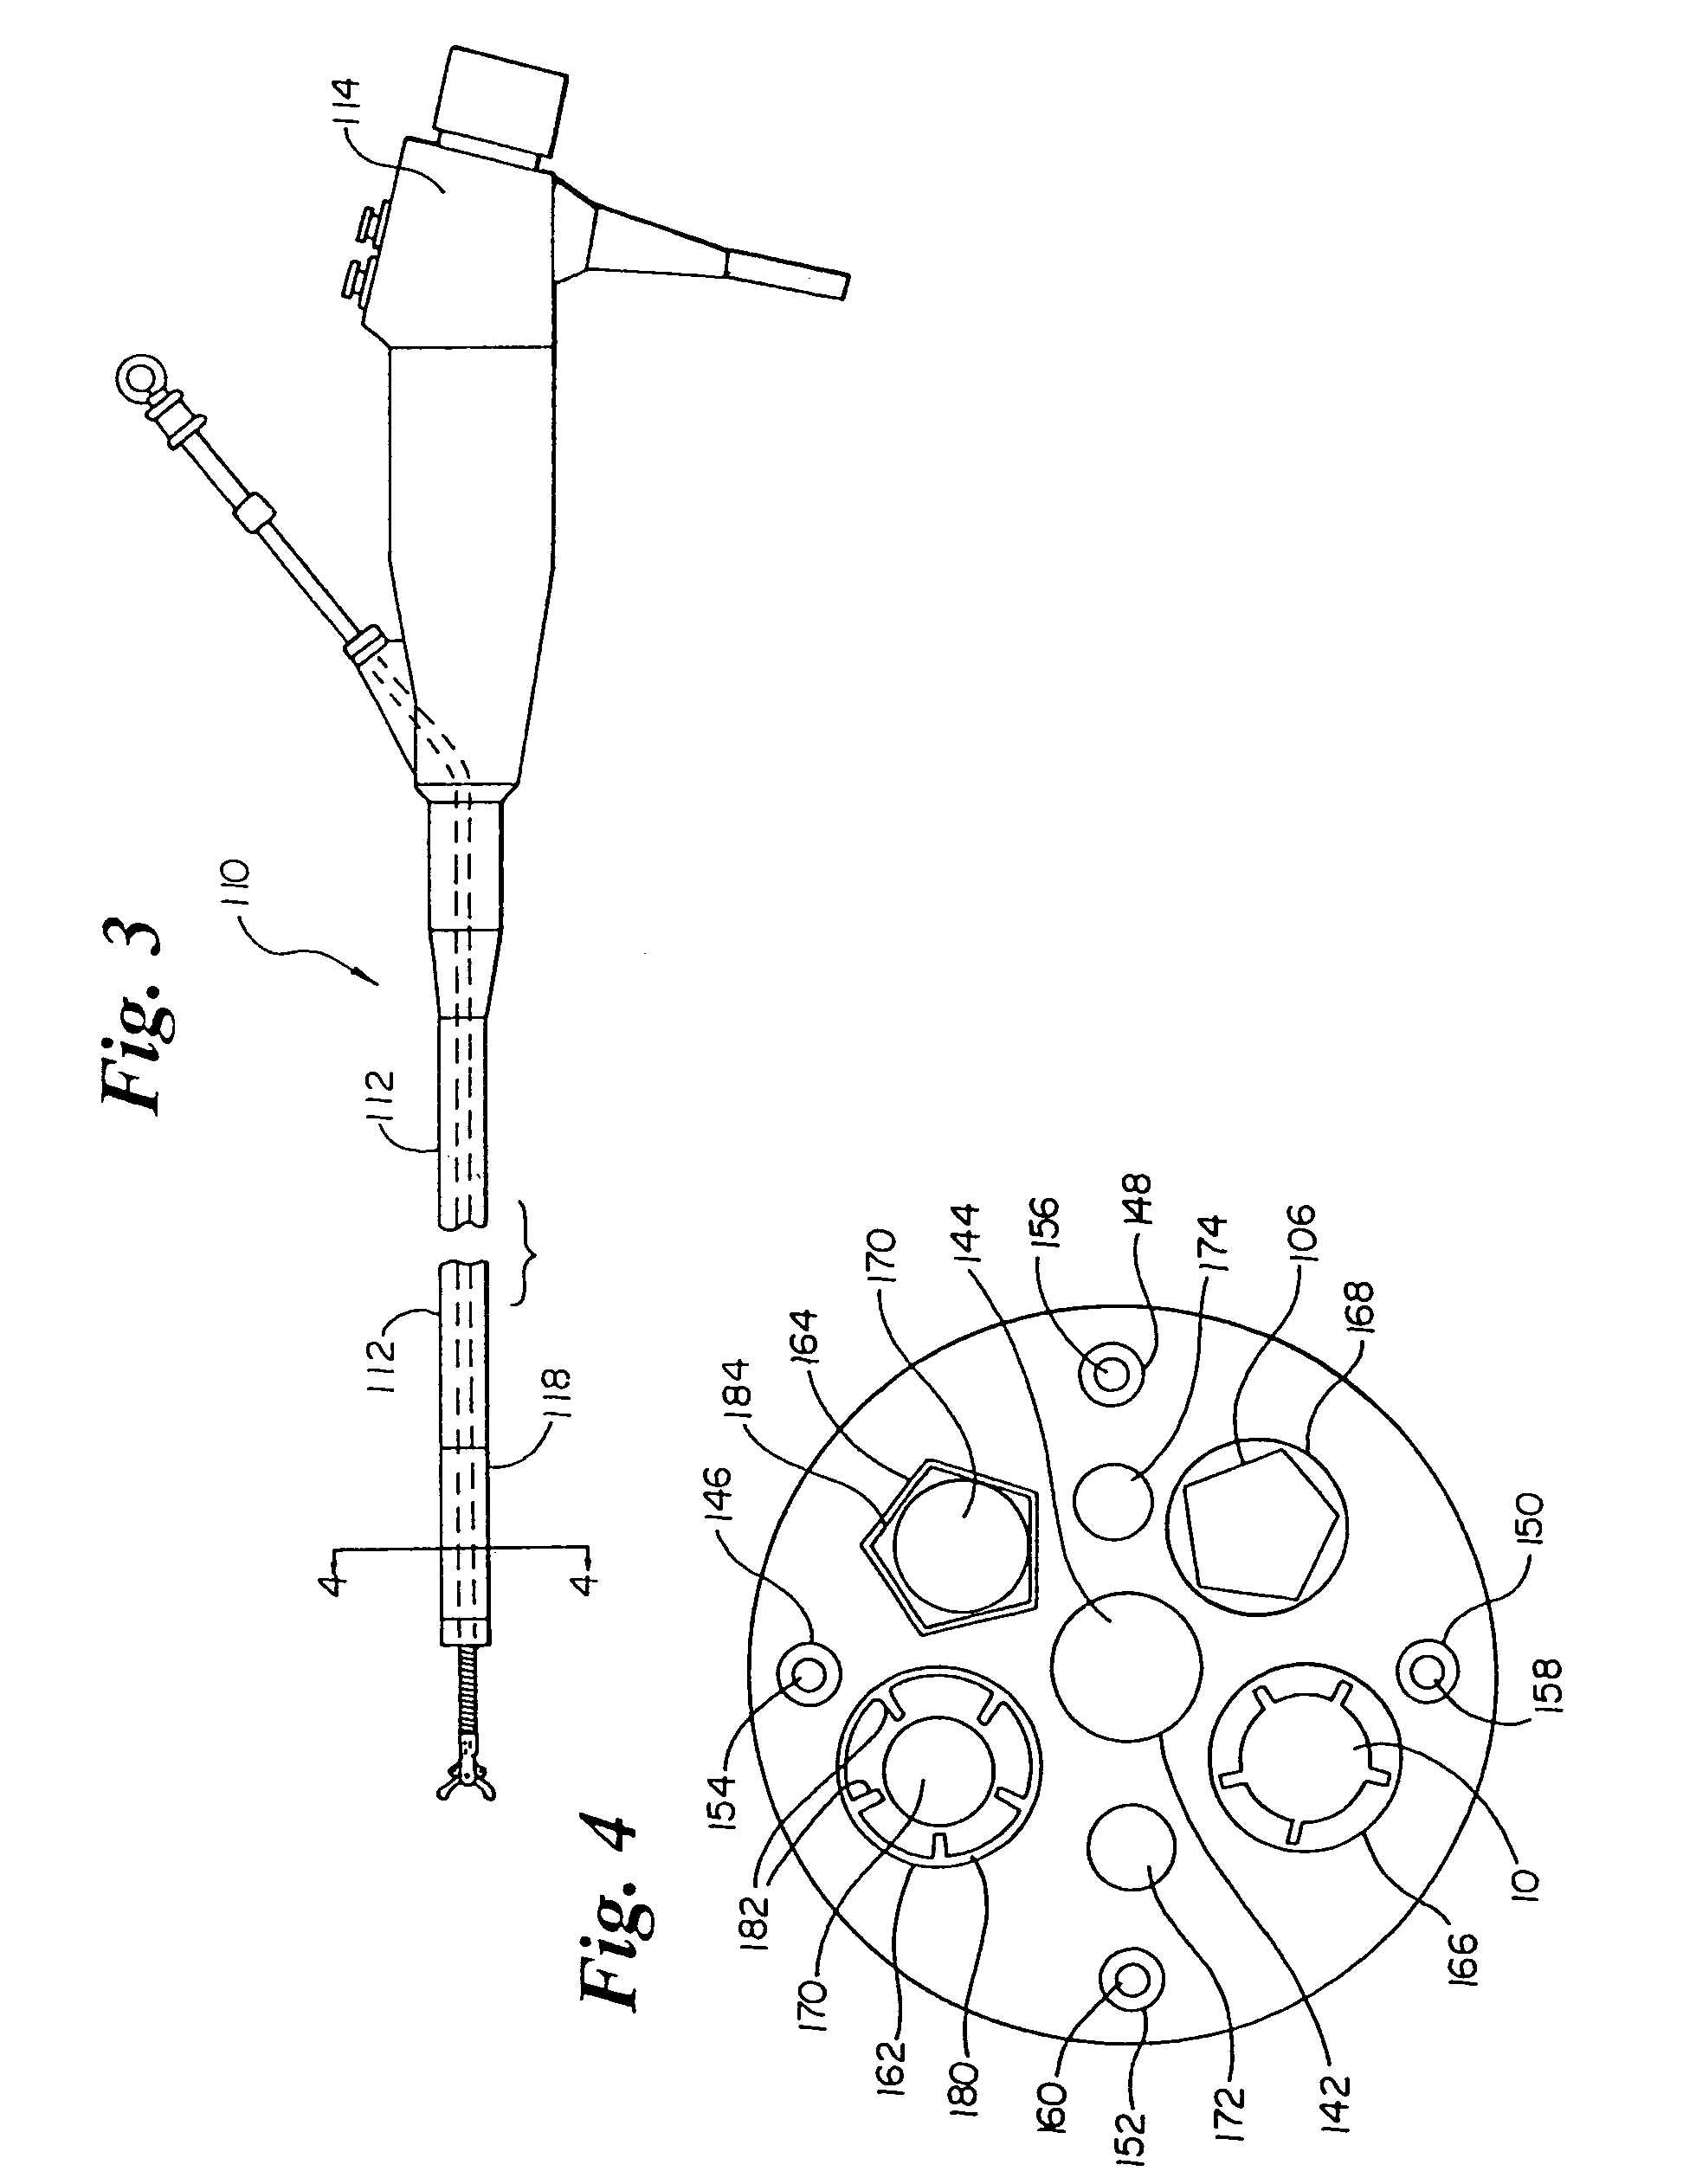 Endoscope and endoscopic instrument system having reduced backlash when moving the endoscopic instrument within a working channel of the endoscope